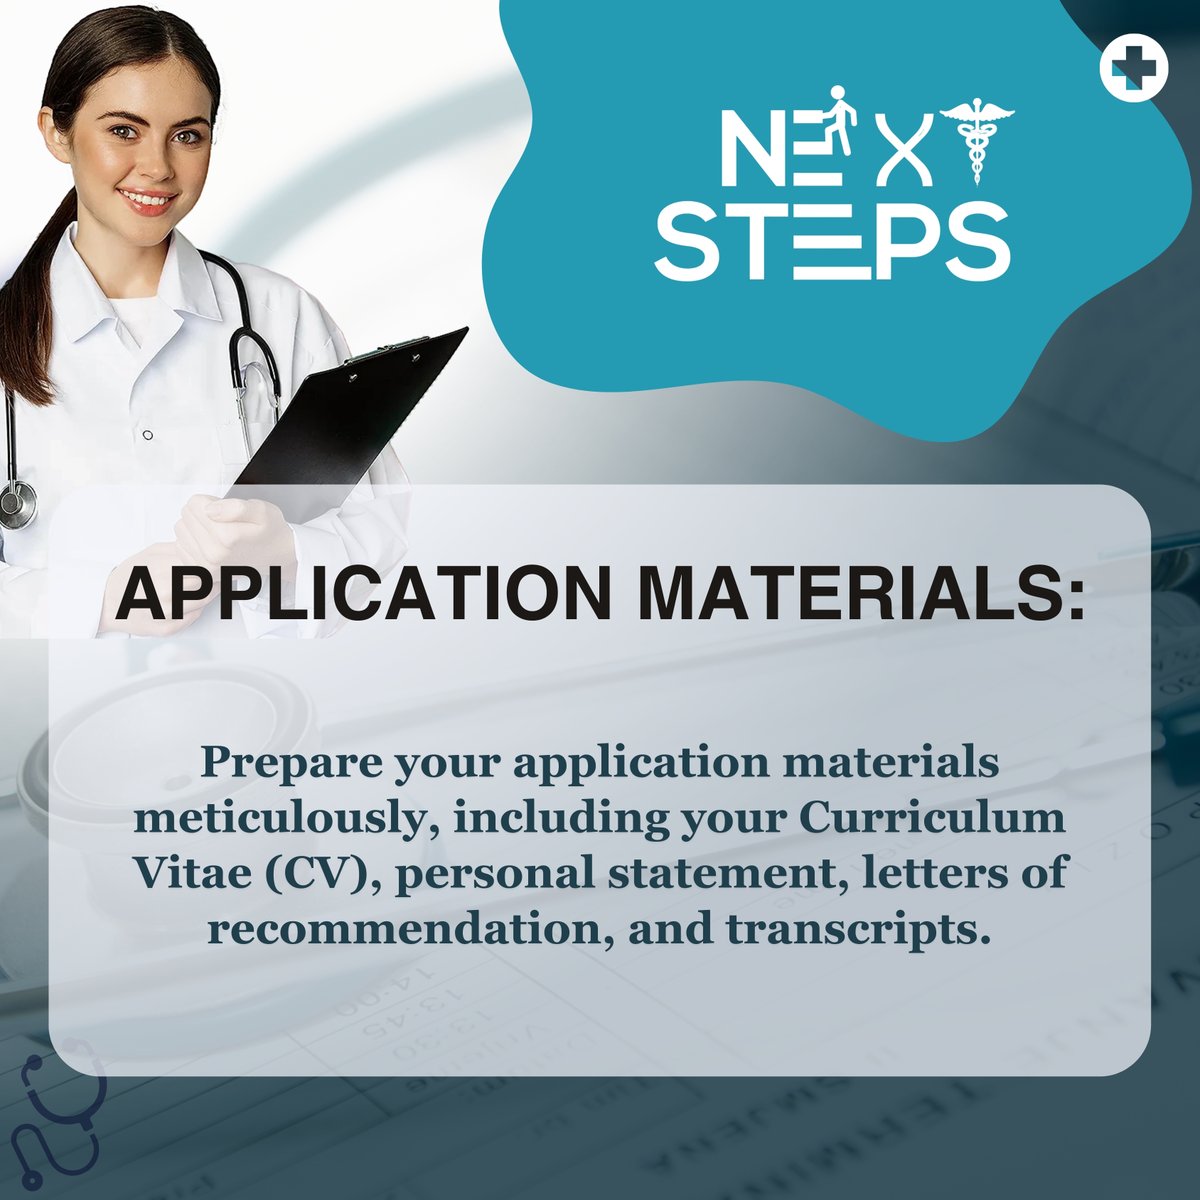 🎓 Prepping for the USMLE match? Here's your roadmap to residency success! 🏥
For USMLE Residency Match: nextstepscareer.com/match-strategy/

#USMLE #Residency #residencymatch #usmlematch #match2024 #nextsteps #nextstepsusmle